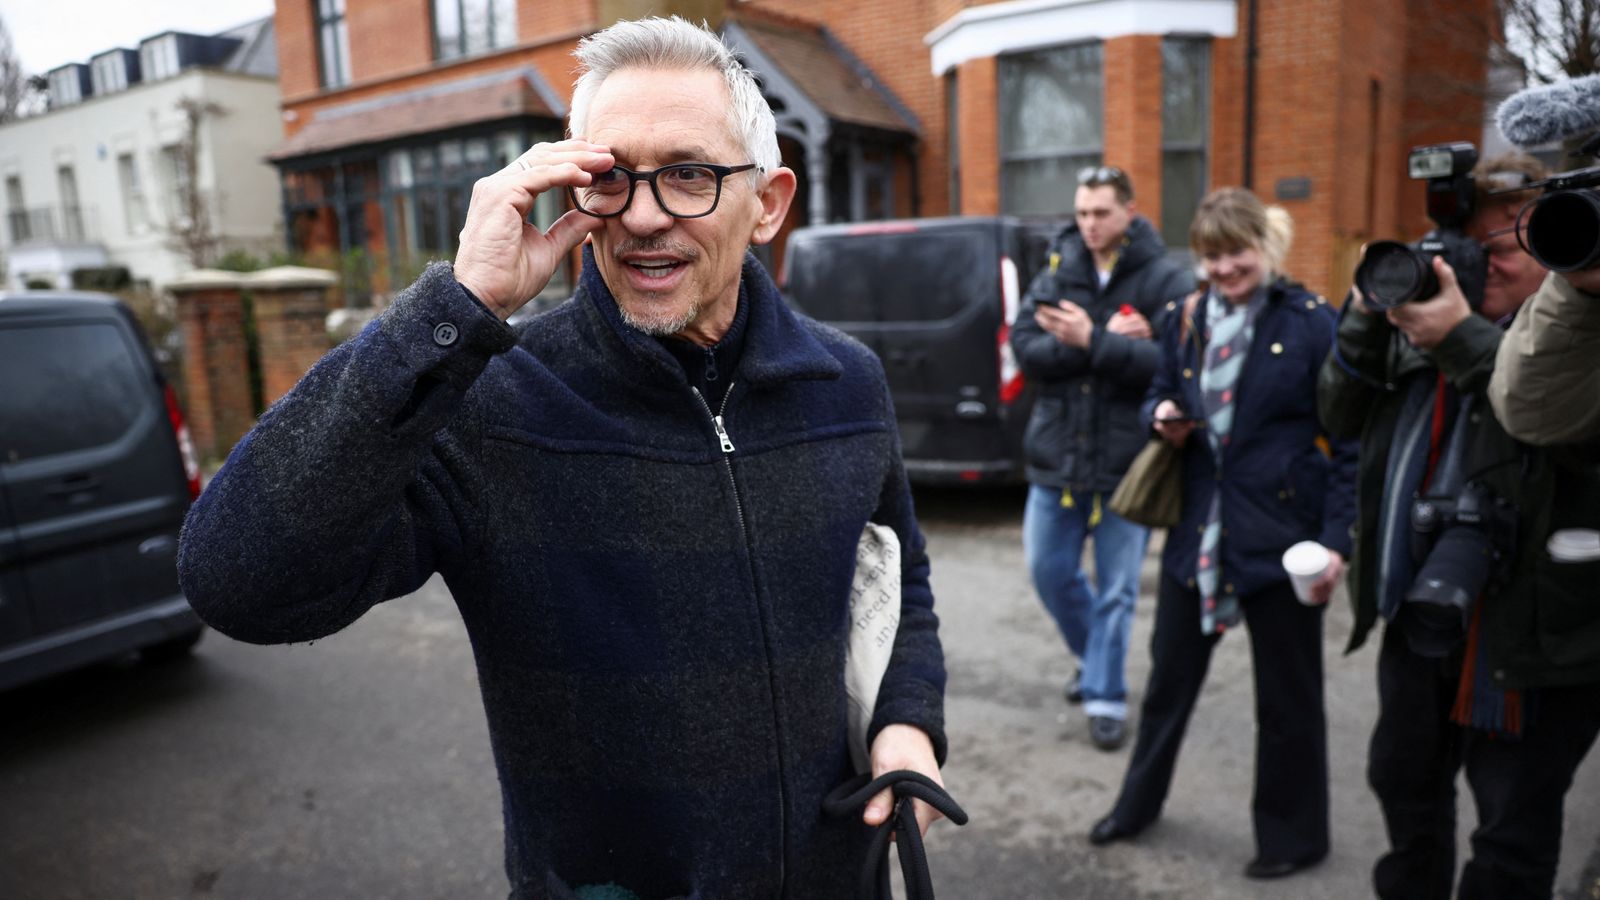 Gary Lineker row 'is like something from Putin's Russia', claims Labour